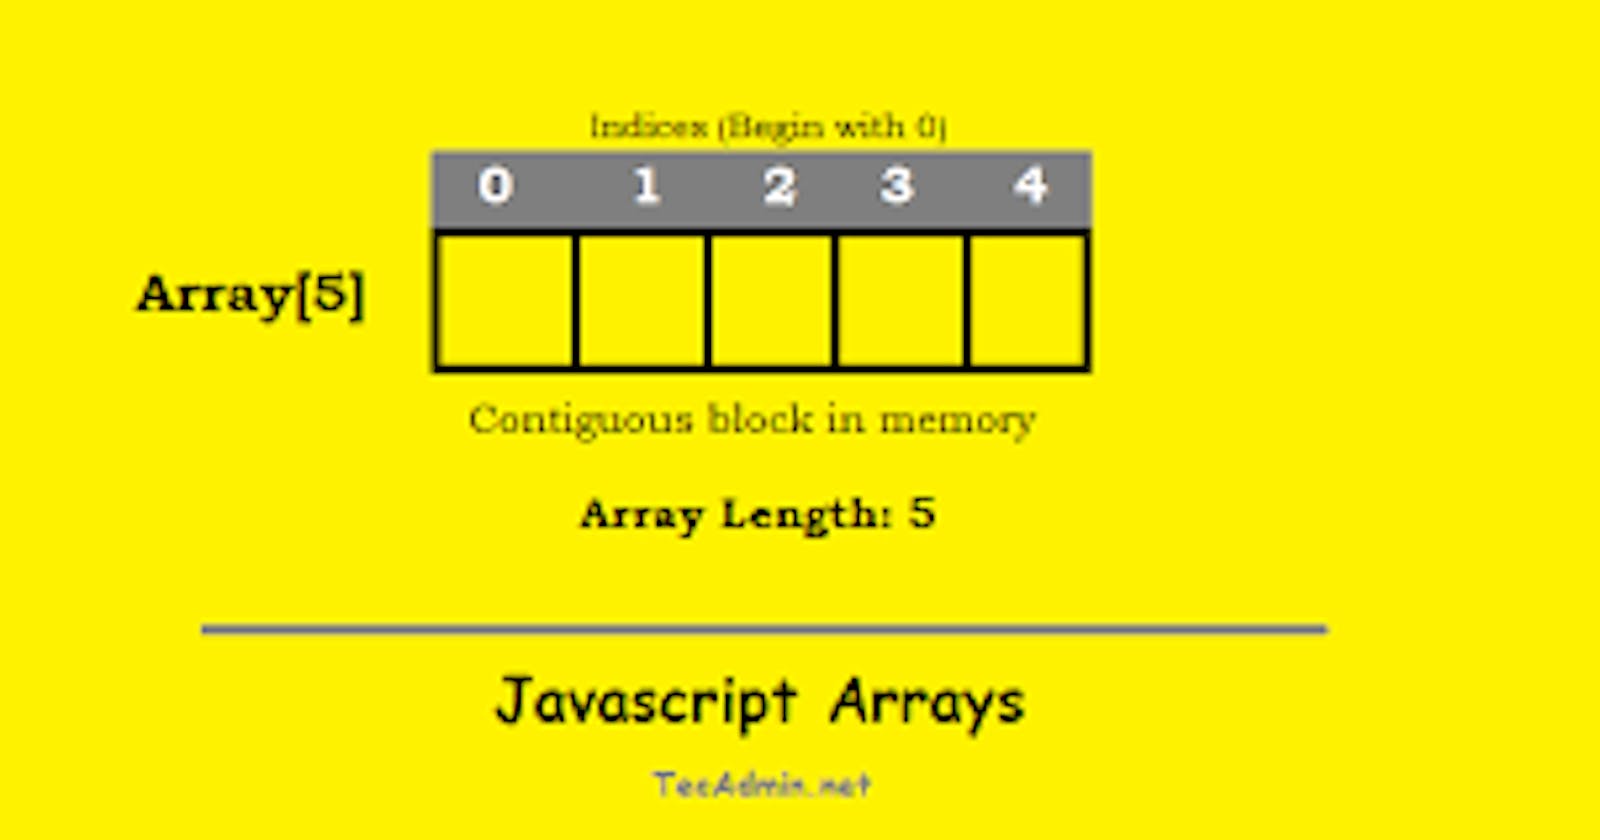 Average of an array